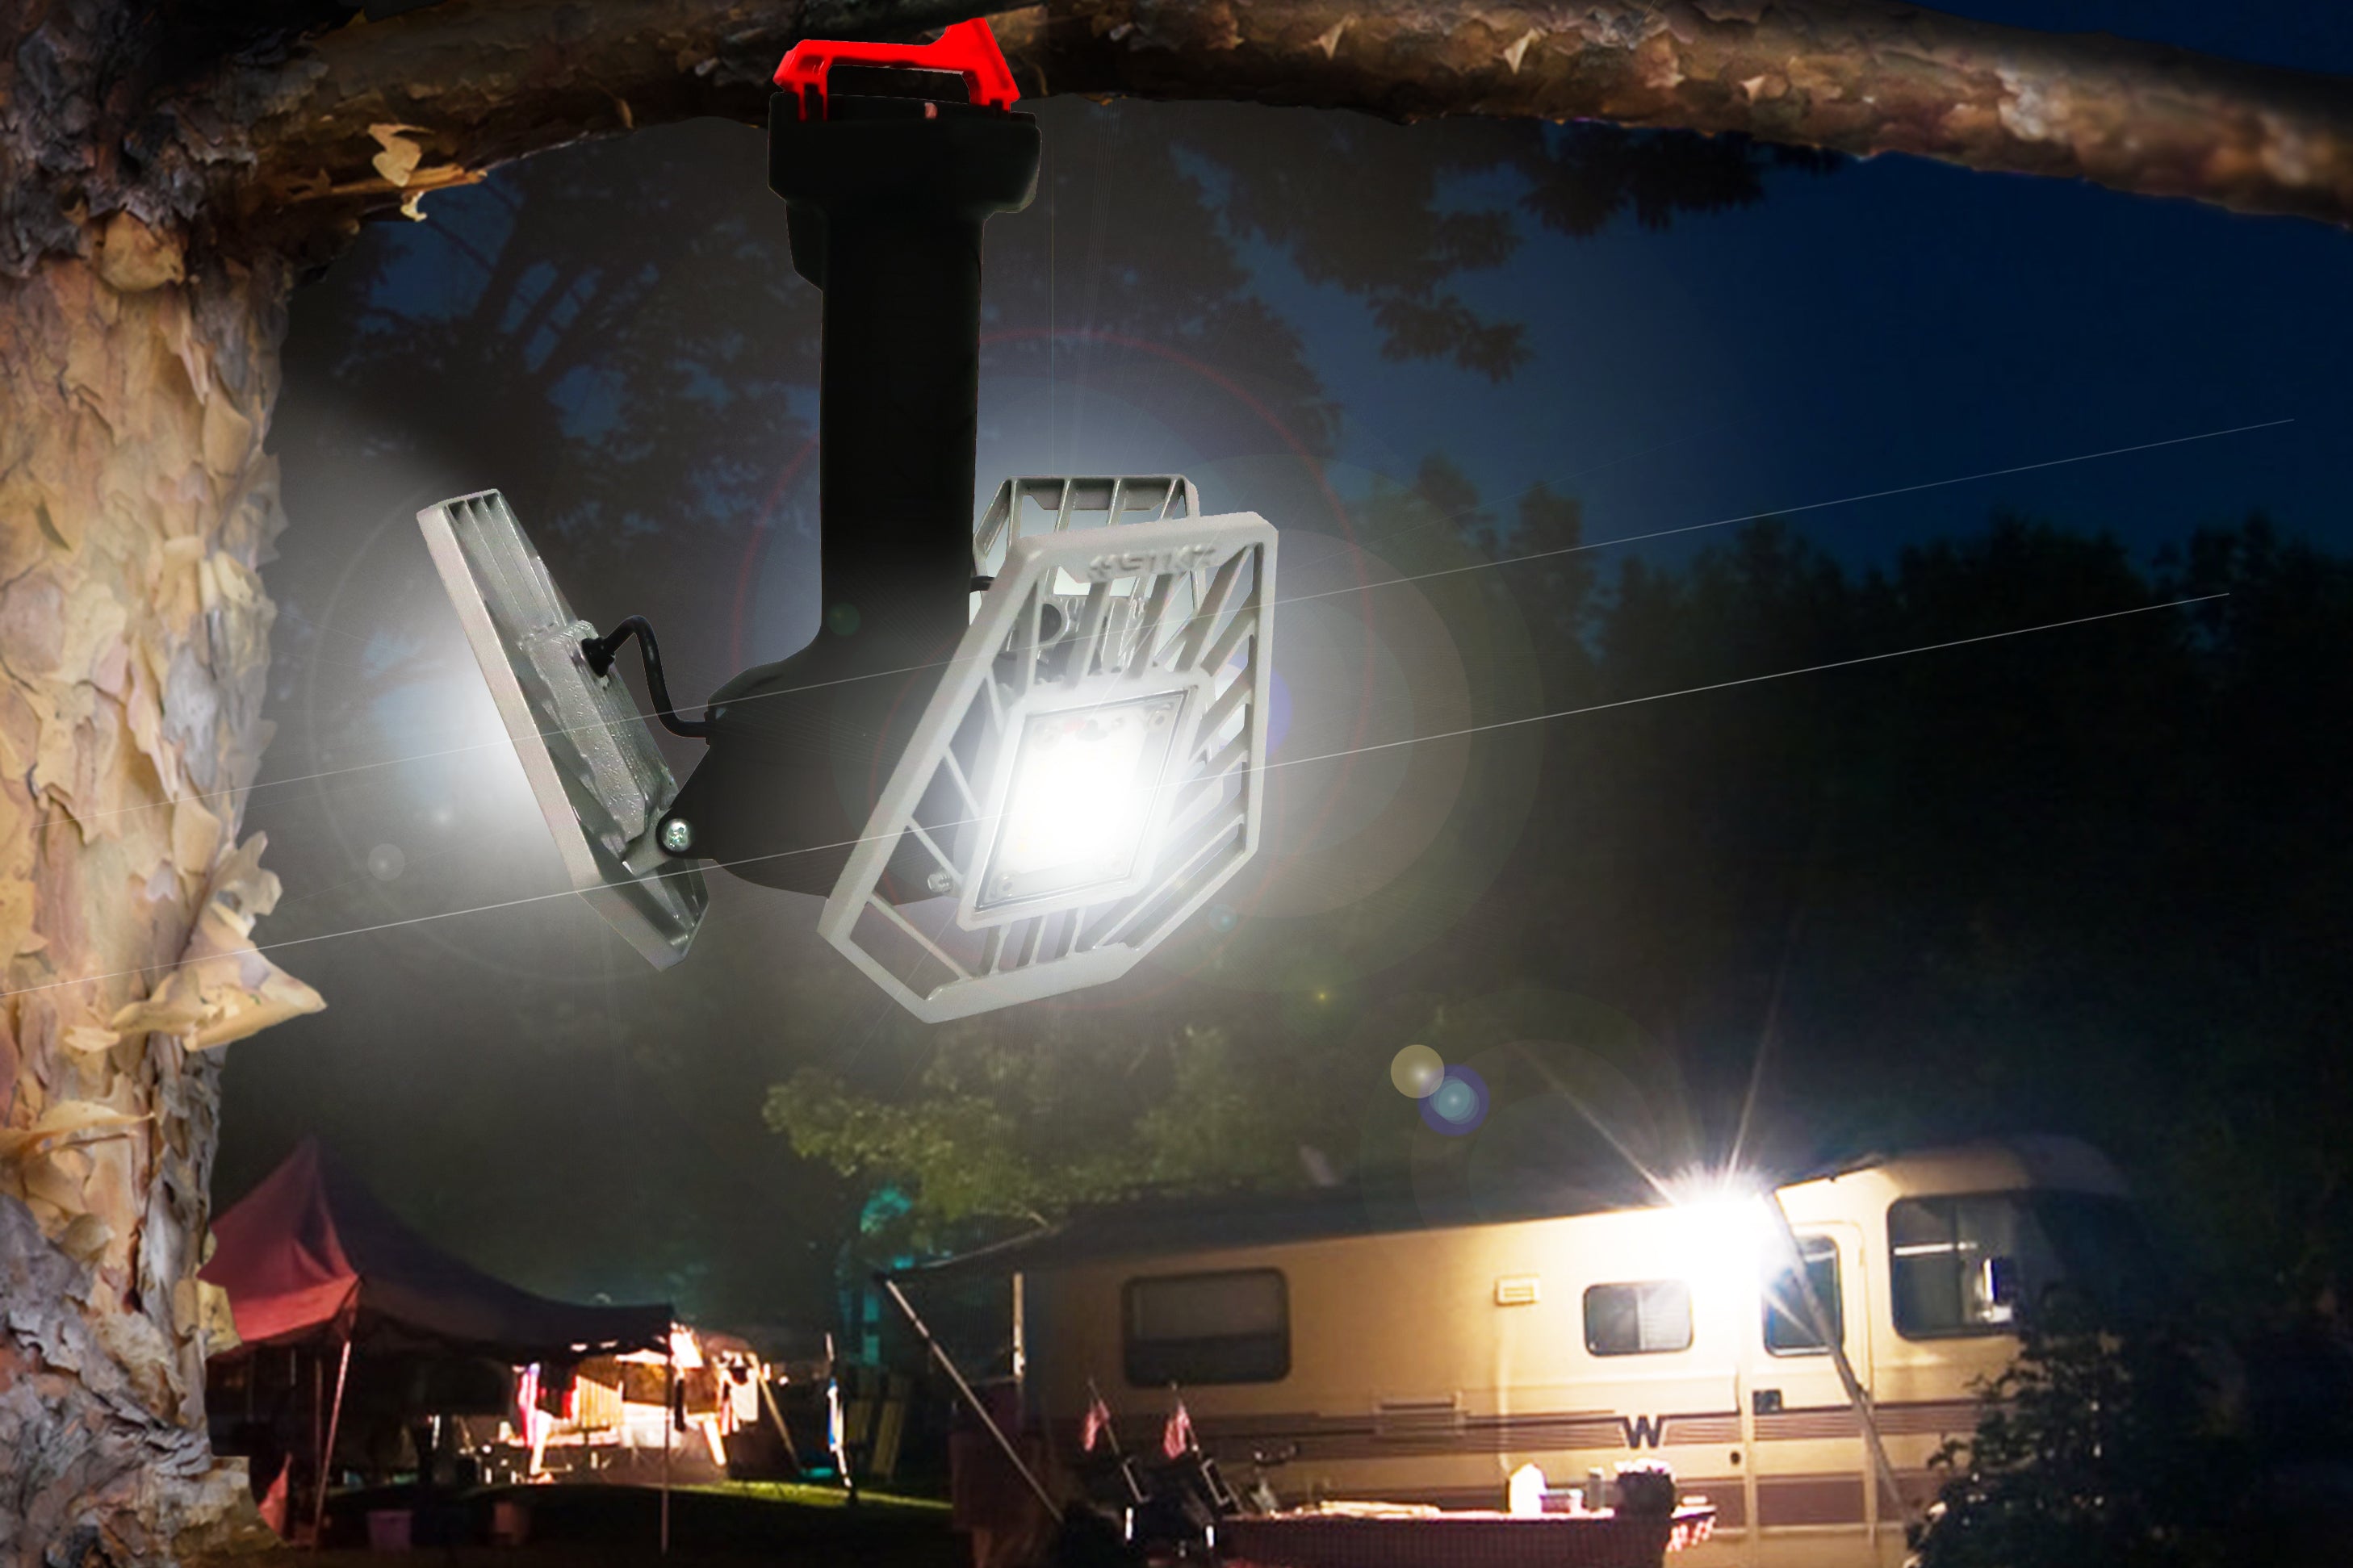 STKR Concepts' Tri-light Shoplight v2 hanging from a tree a night with an RV camping scene in the background